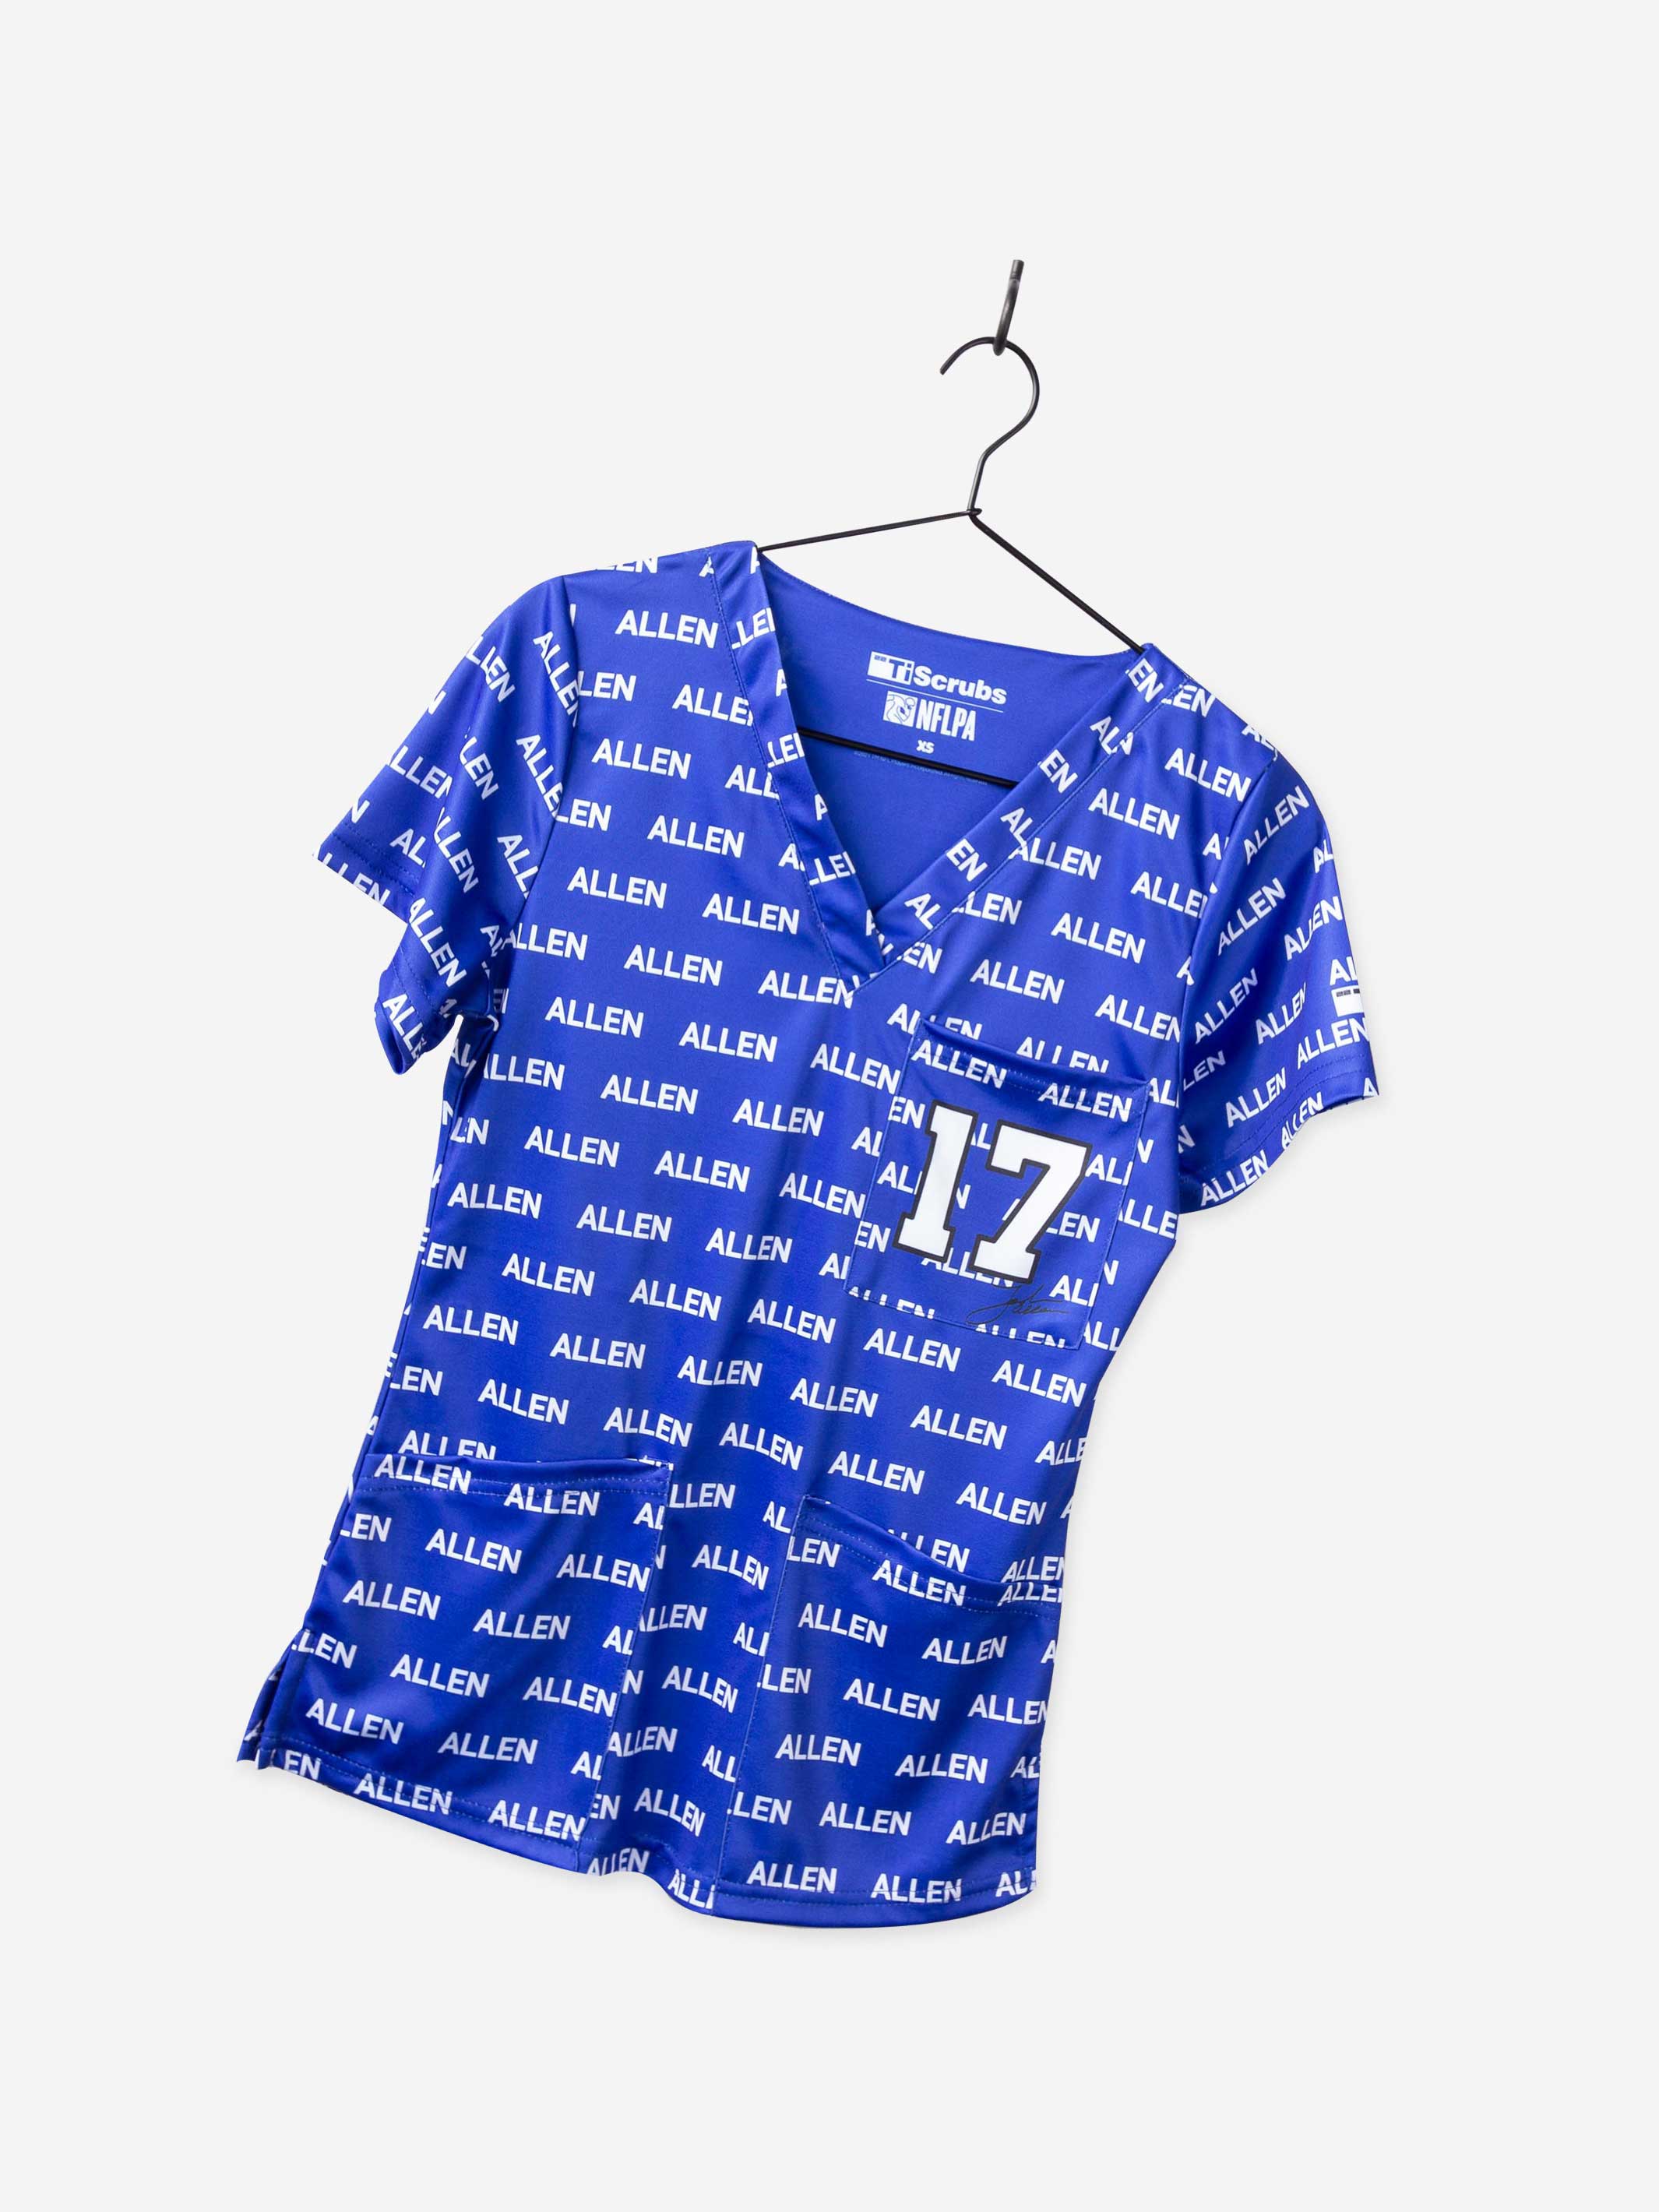 Women's NFL Josh Allen Scrub Top in Royal Blue with number 17 and signature